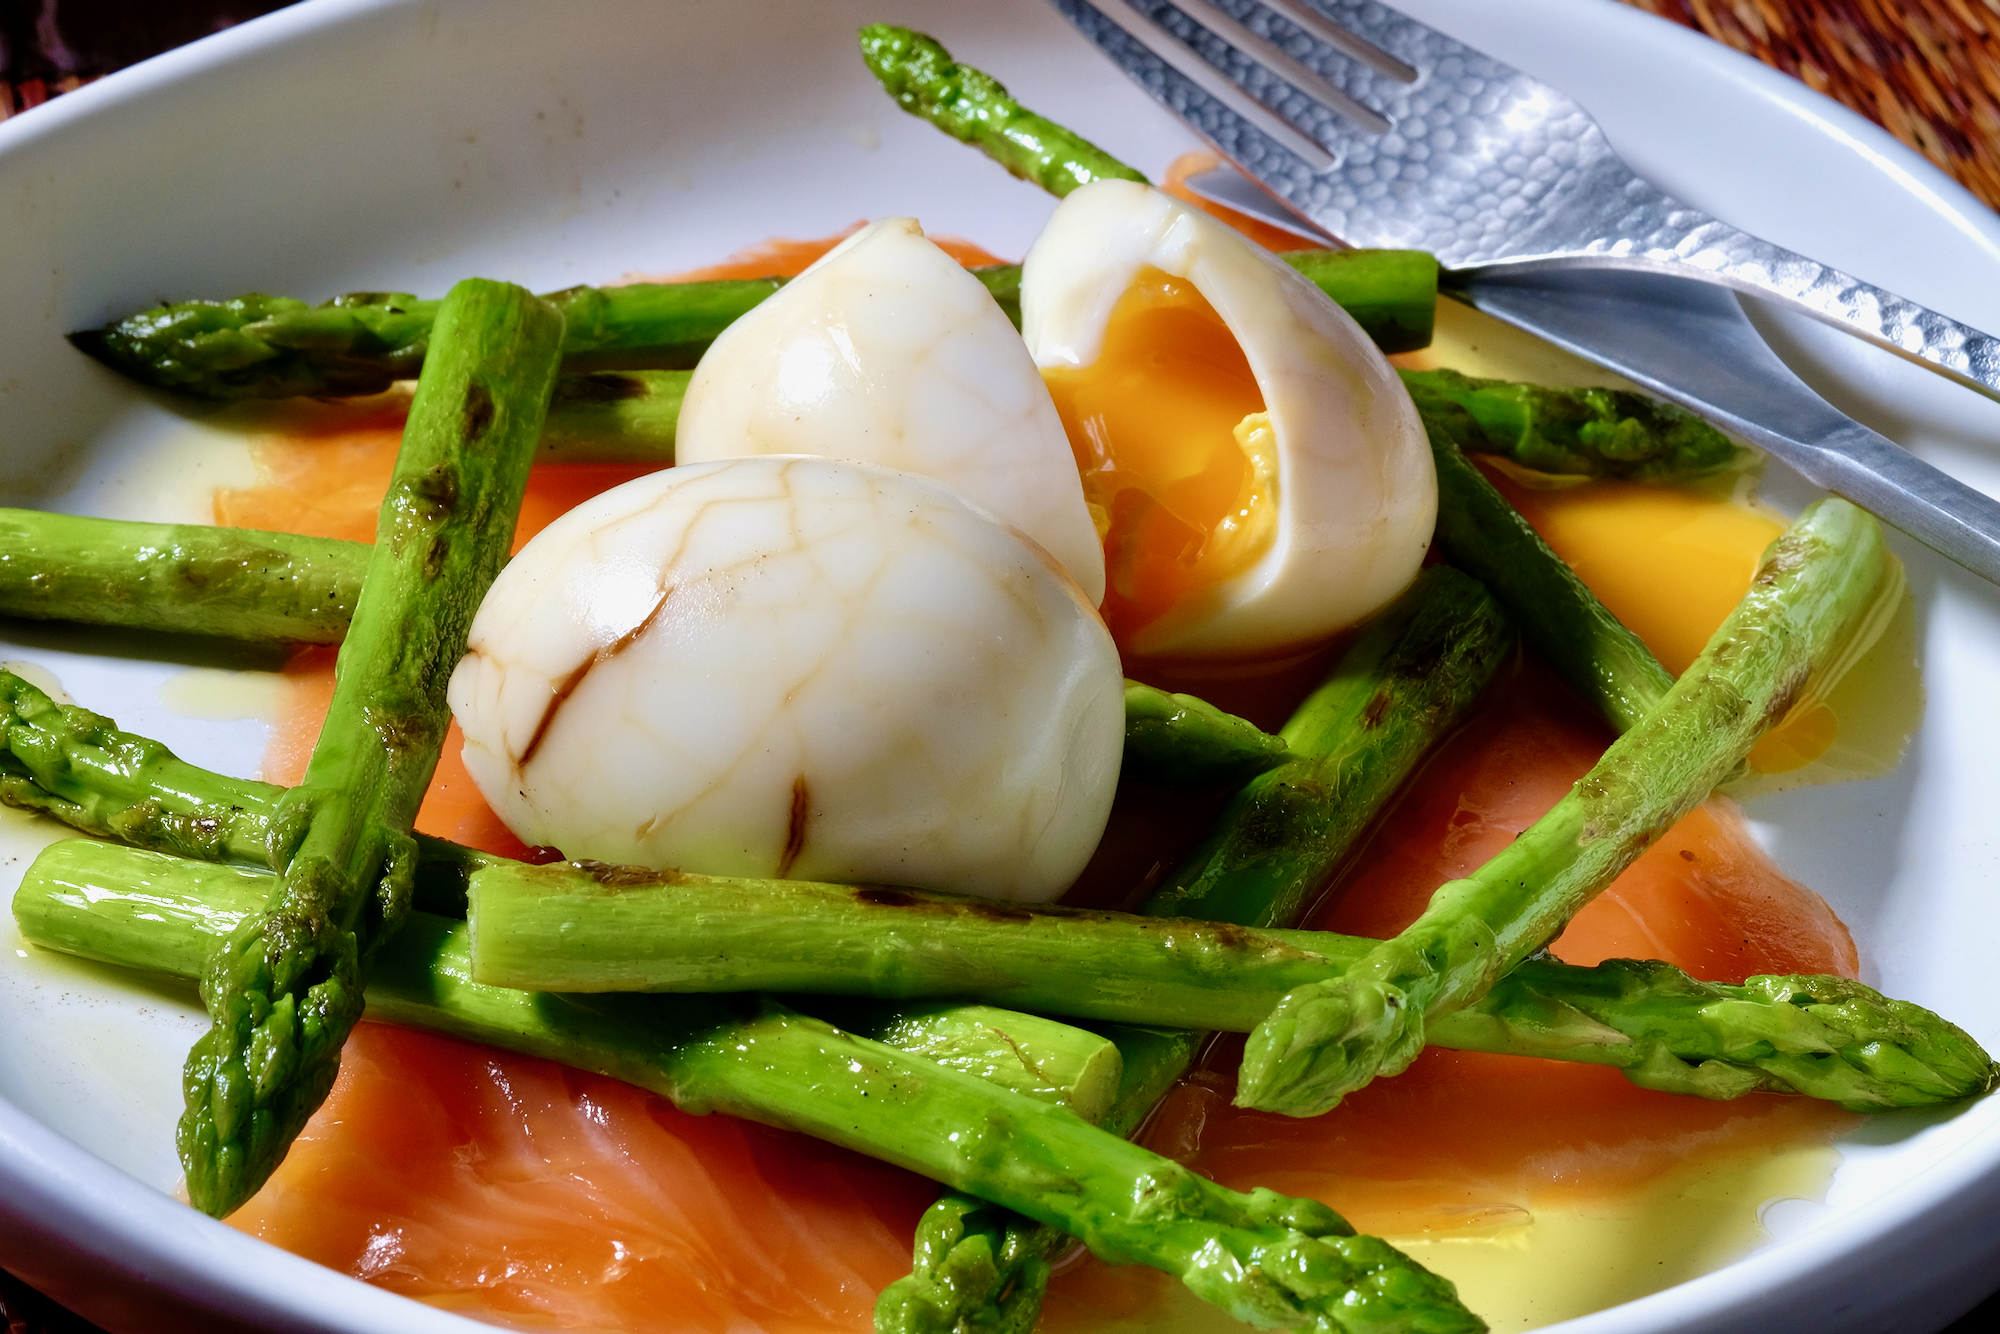 https://www.delectabilia.com/wp-content/uploads/smoky-tea-and-soy-marinated-eggs-asparagus-smoked-salmon.jpeg